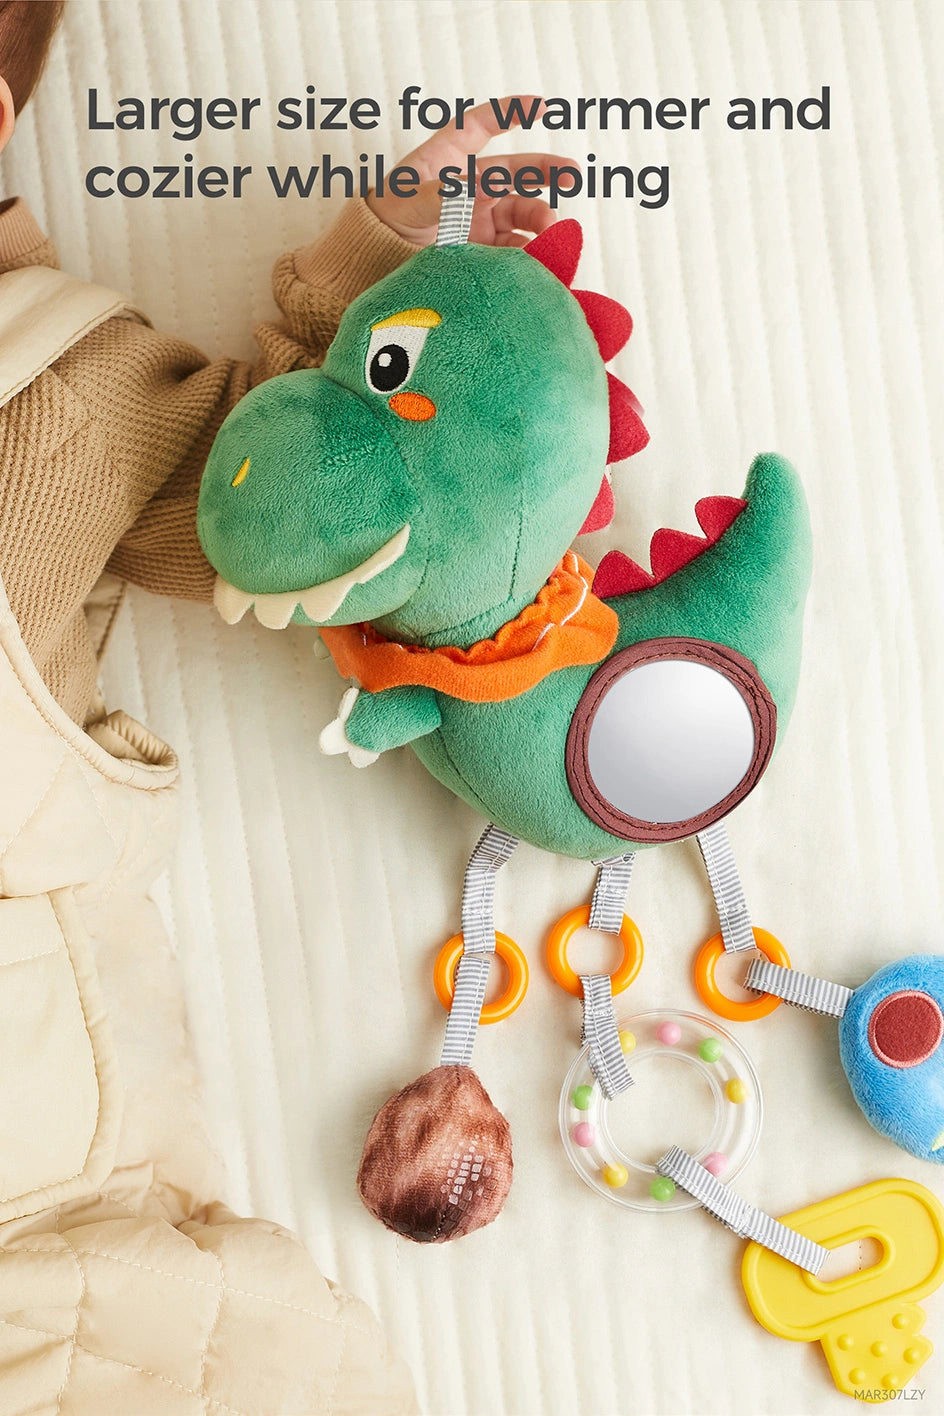 Baby toy dinosaur with mirror and bell for interactive play